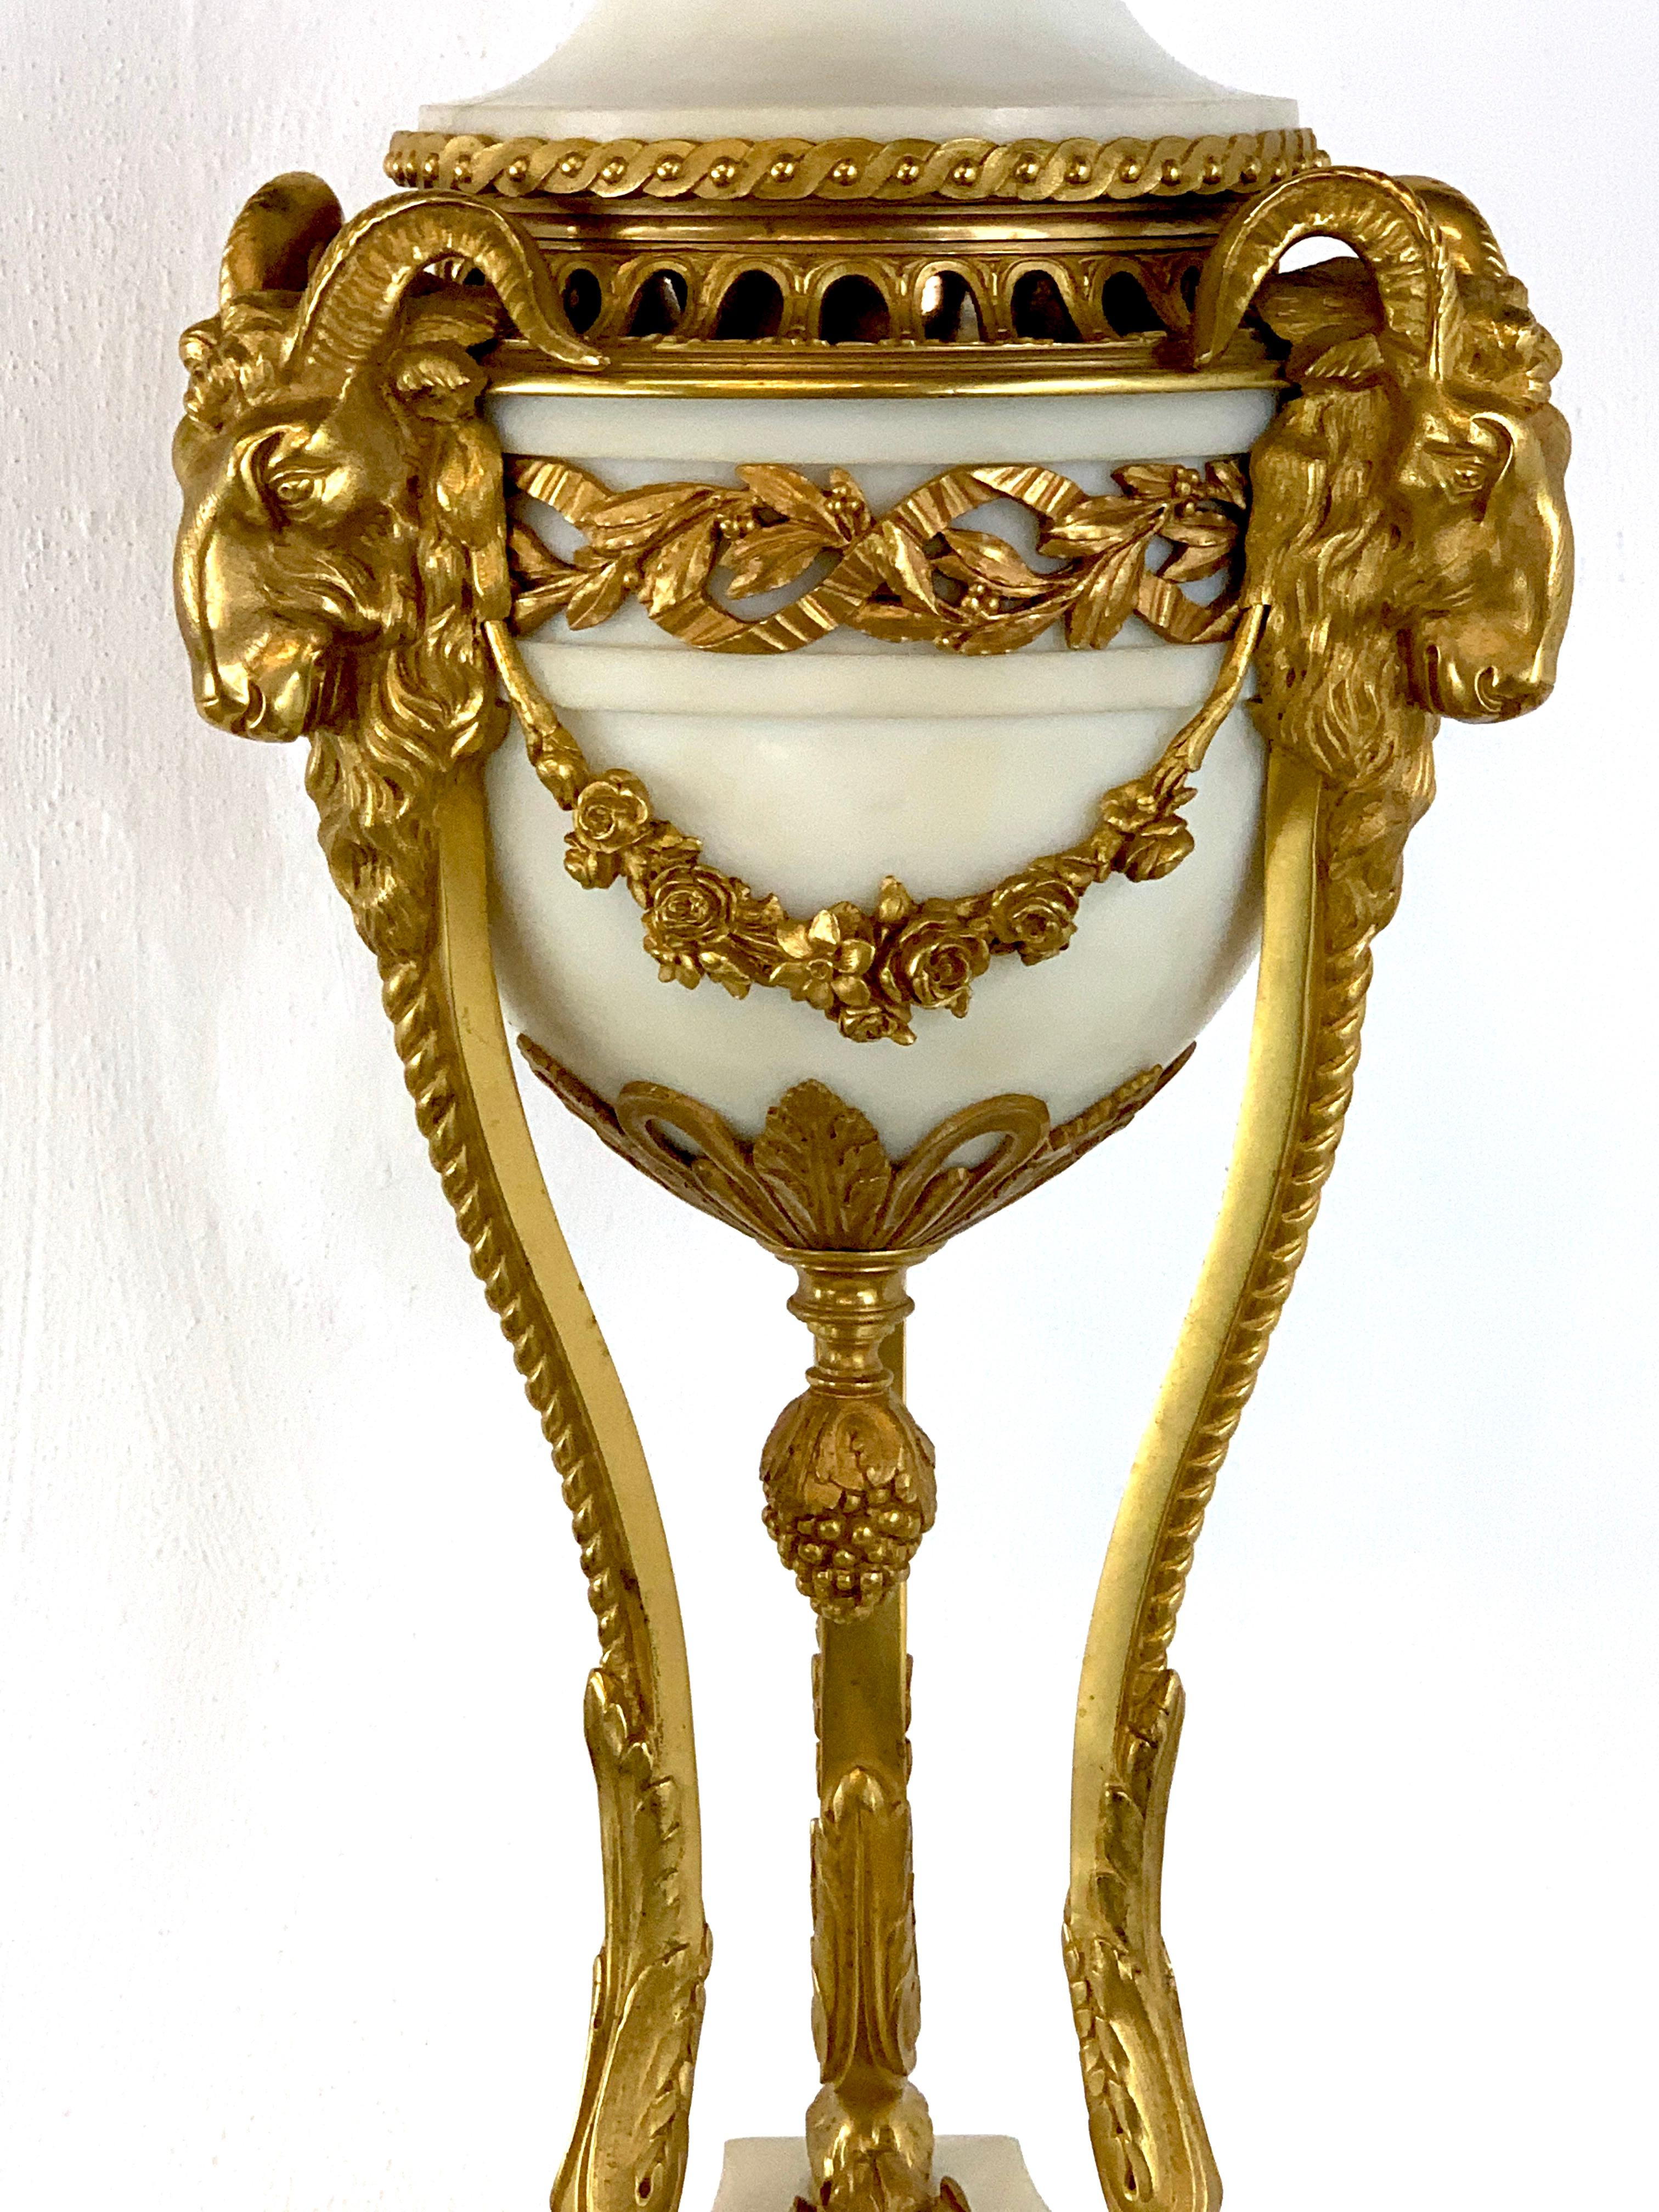 19th Century Single Louis XVI Style Ormolu and Marble Neoclassical Cassolette/Urn For Sale